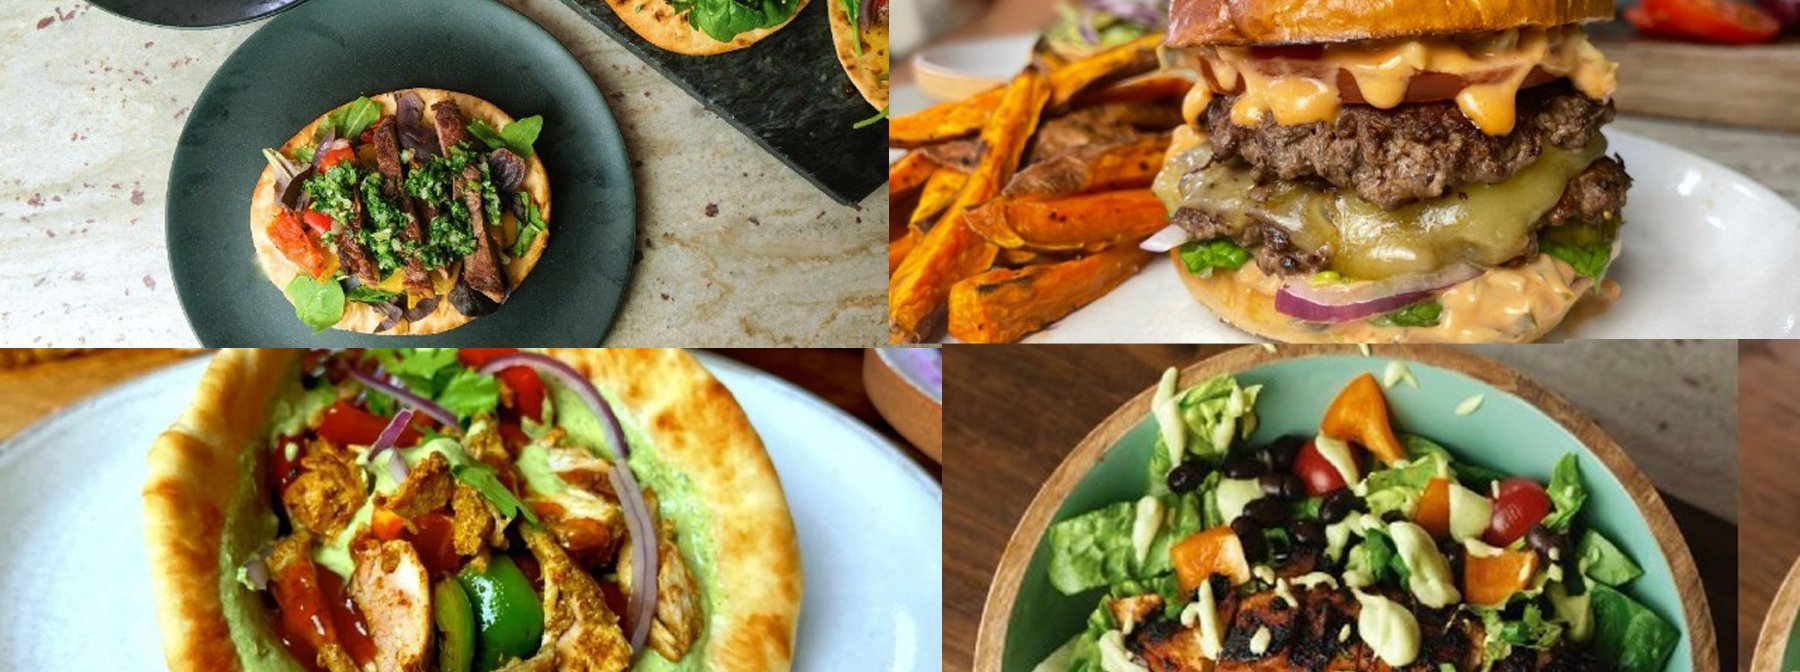 8 Recipes For Your Barbeque That Aren’t Bog-Standard Burgers